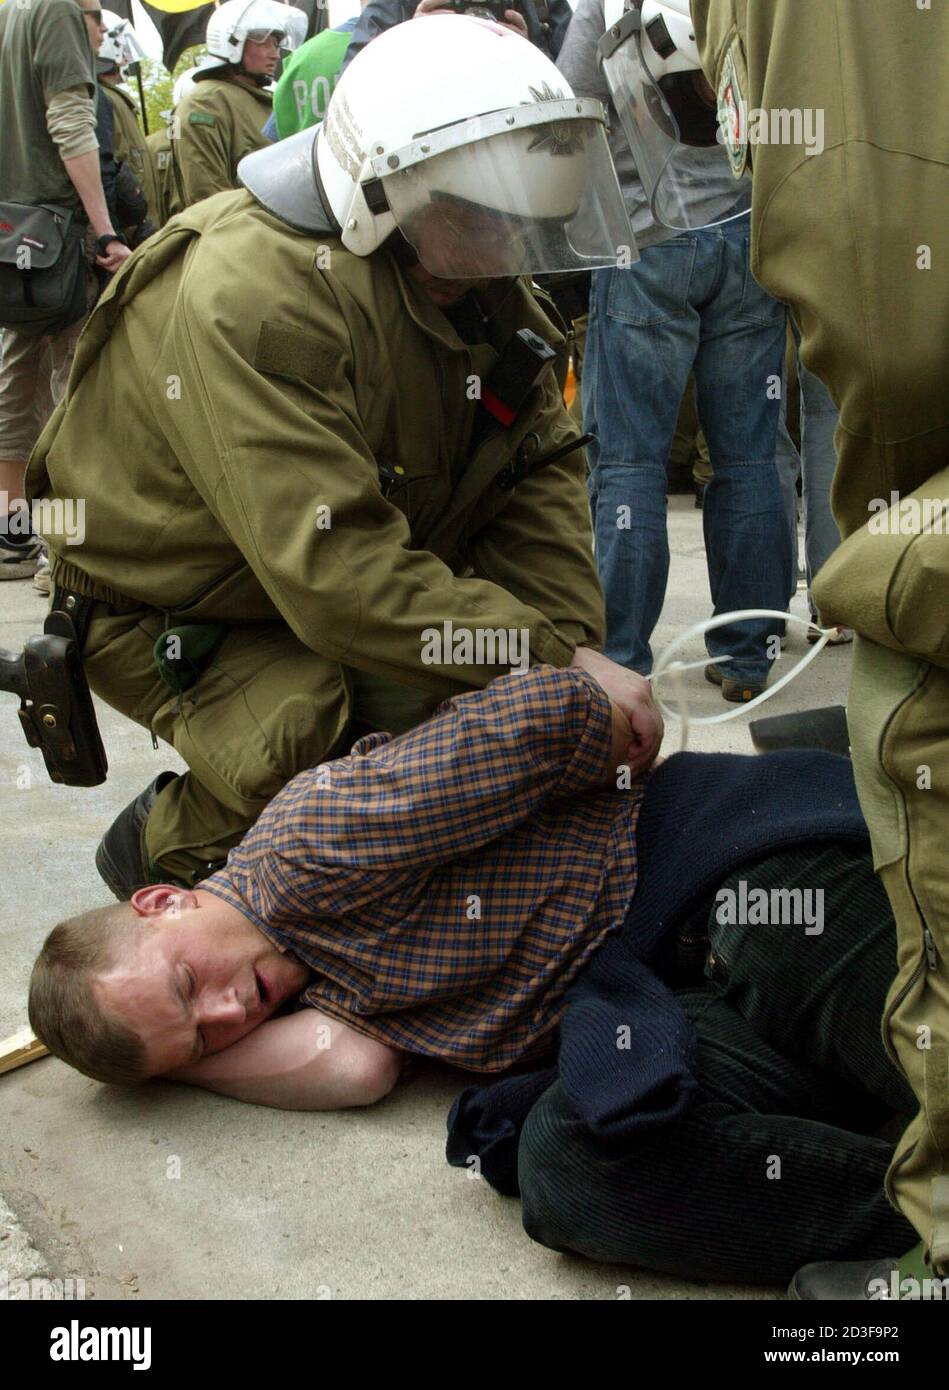 German riot police arrests a neo-Nazi during May Day demonstration by the German far-right National Democratic Party (NPD) in Berlin May 1, 2004. [Some 2.000 NPD members took part in a demonstration in Berlin on Saturday, with left-wing counter-demonstrators trying to stop the march.] Stock Photo